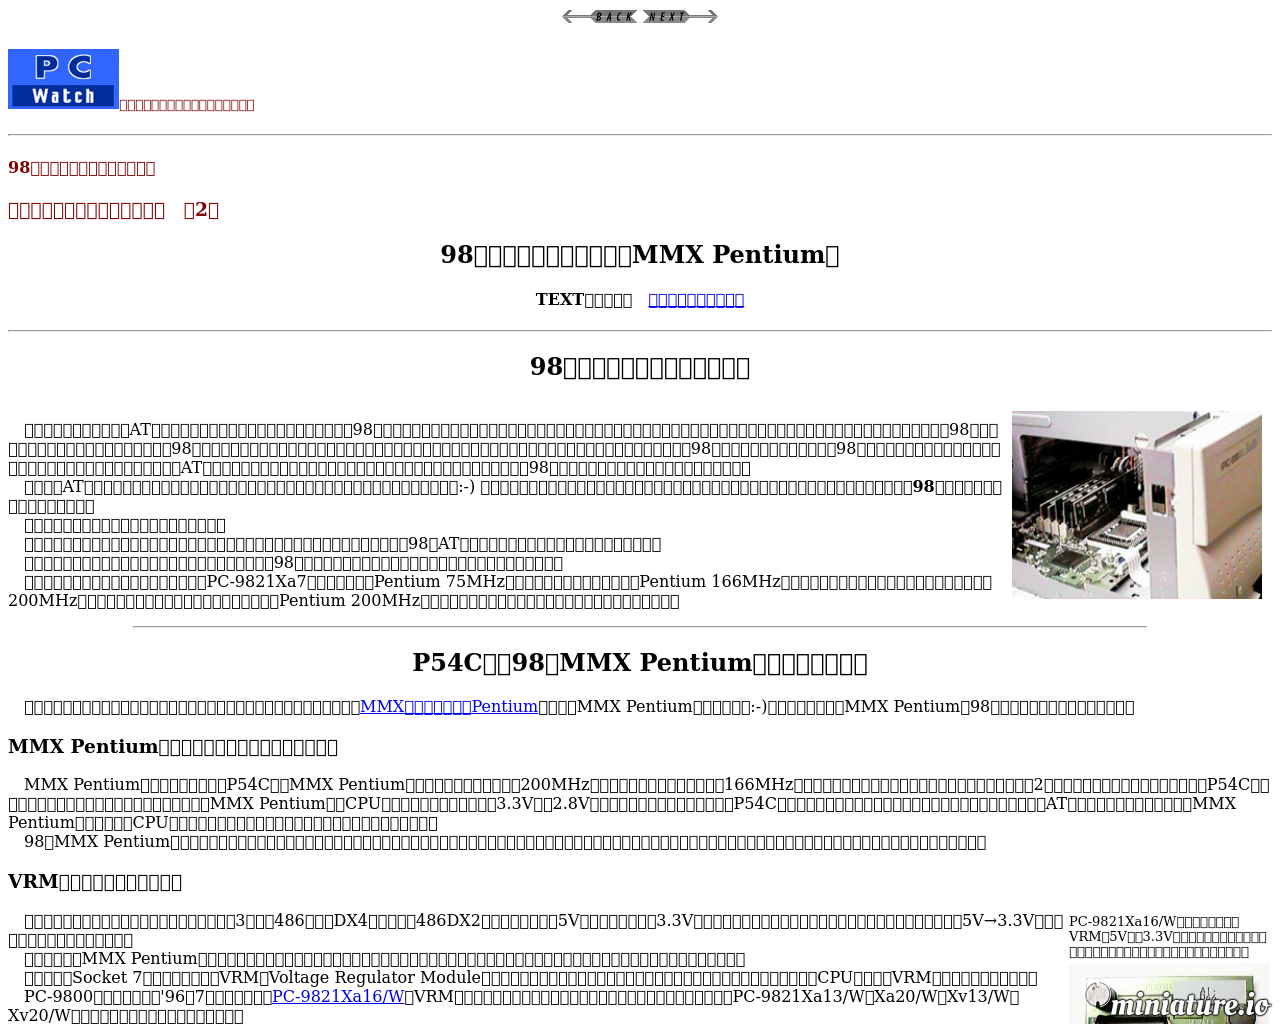 http://pc.watch.impress.co.jp/docs/article/970305/98now2.htmのプレビュー画像